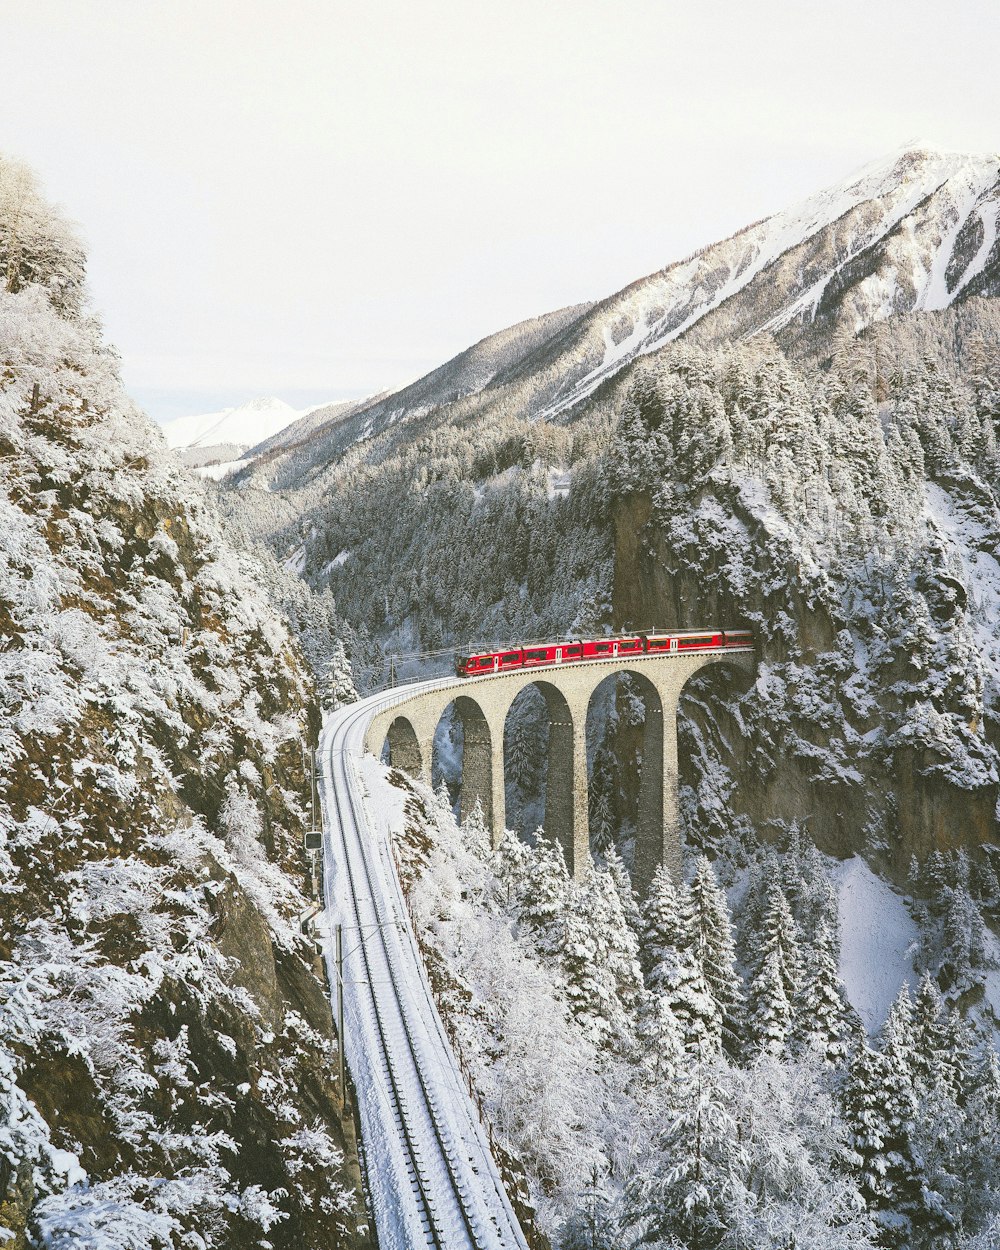 approaching red train across mountains